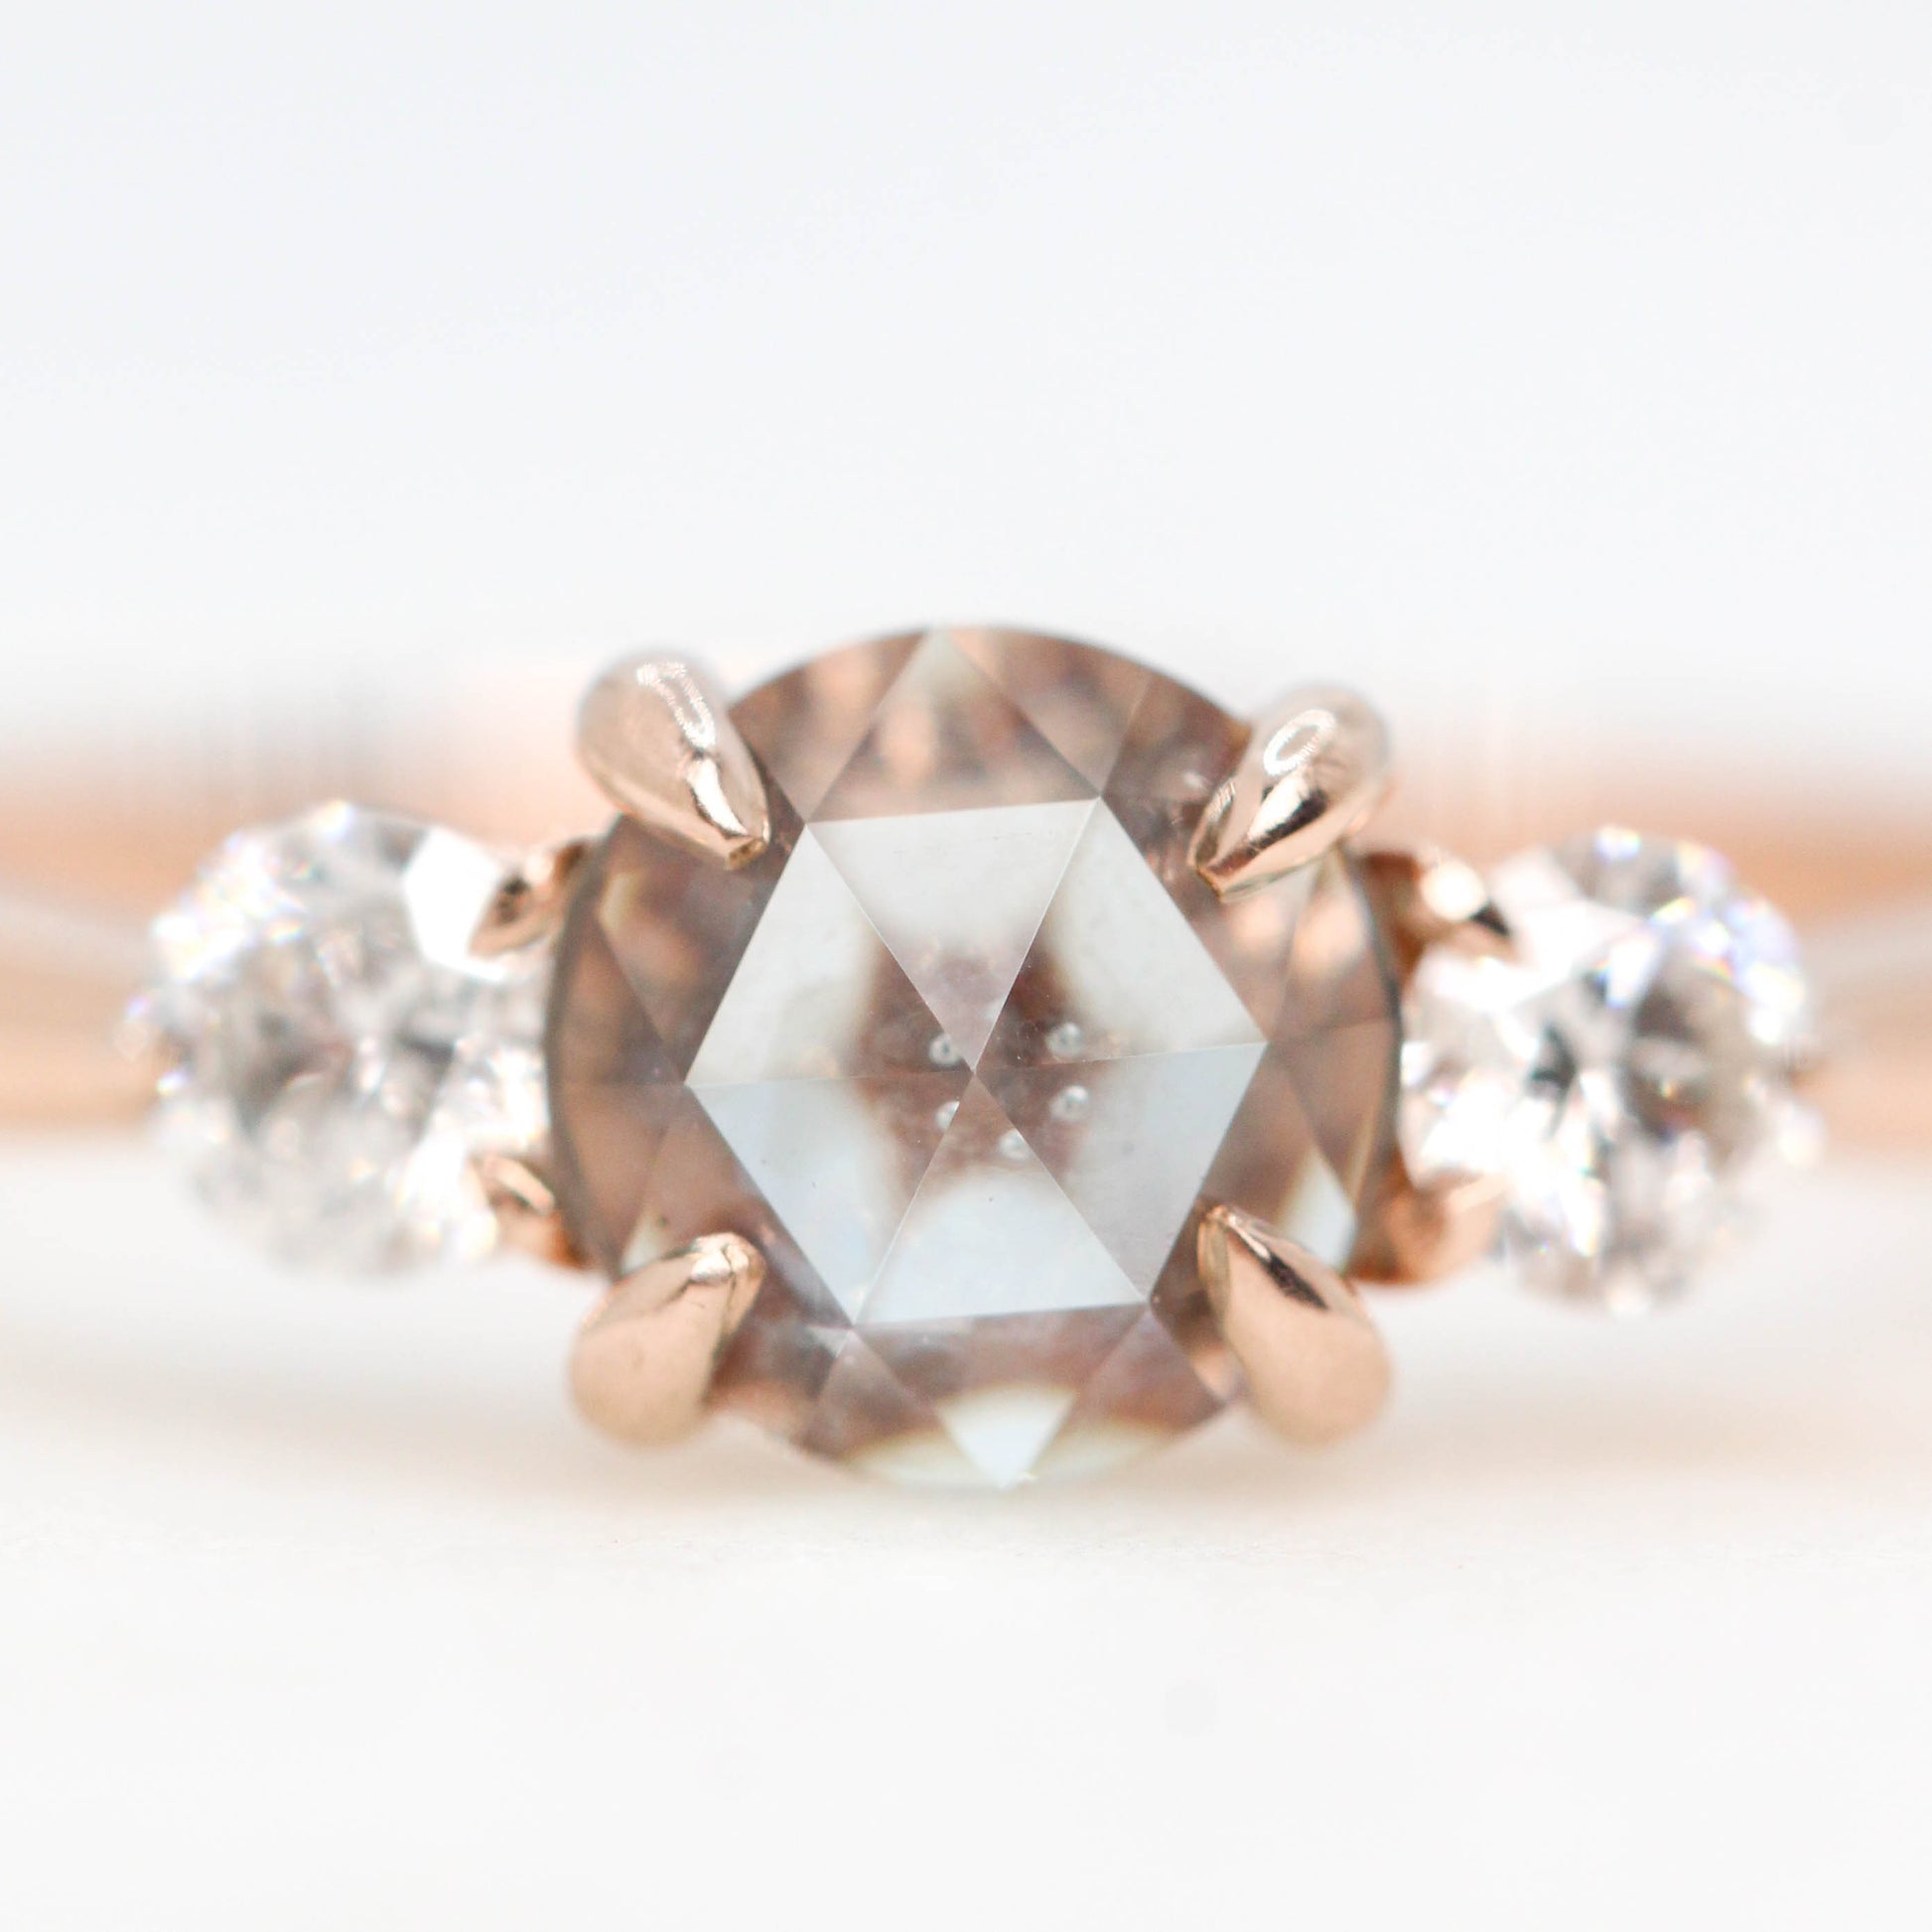 Olive Ring with a 0.82 Carat Light Blue Round Sapphire and White Diamond Accents in 10k Rose Gold - Ready to Size and Ship - Midwinter Co. Alternative Bridal Rings and Modern Fine Jewelry